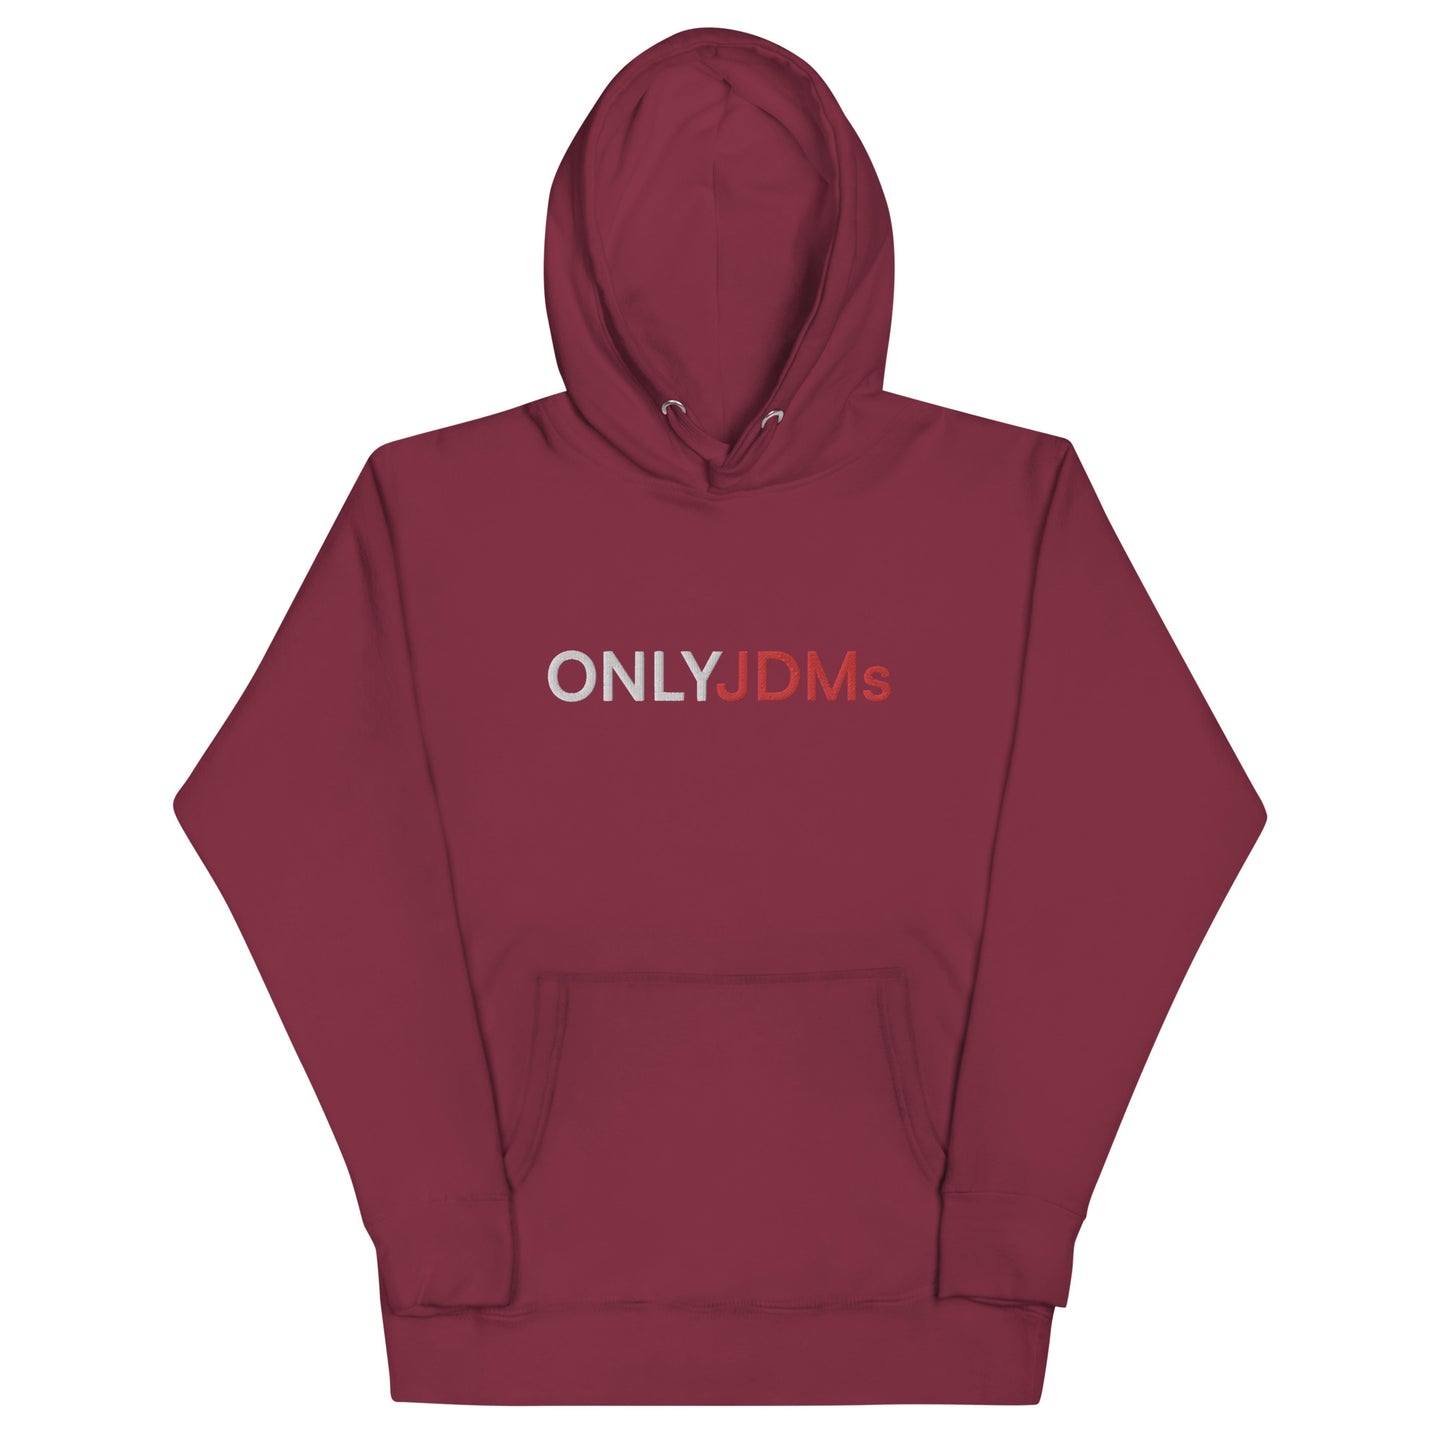 OnlyJDMs Embroidered Hoodie